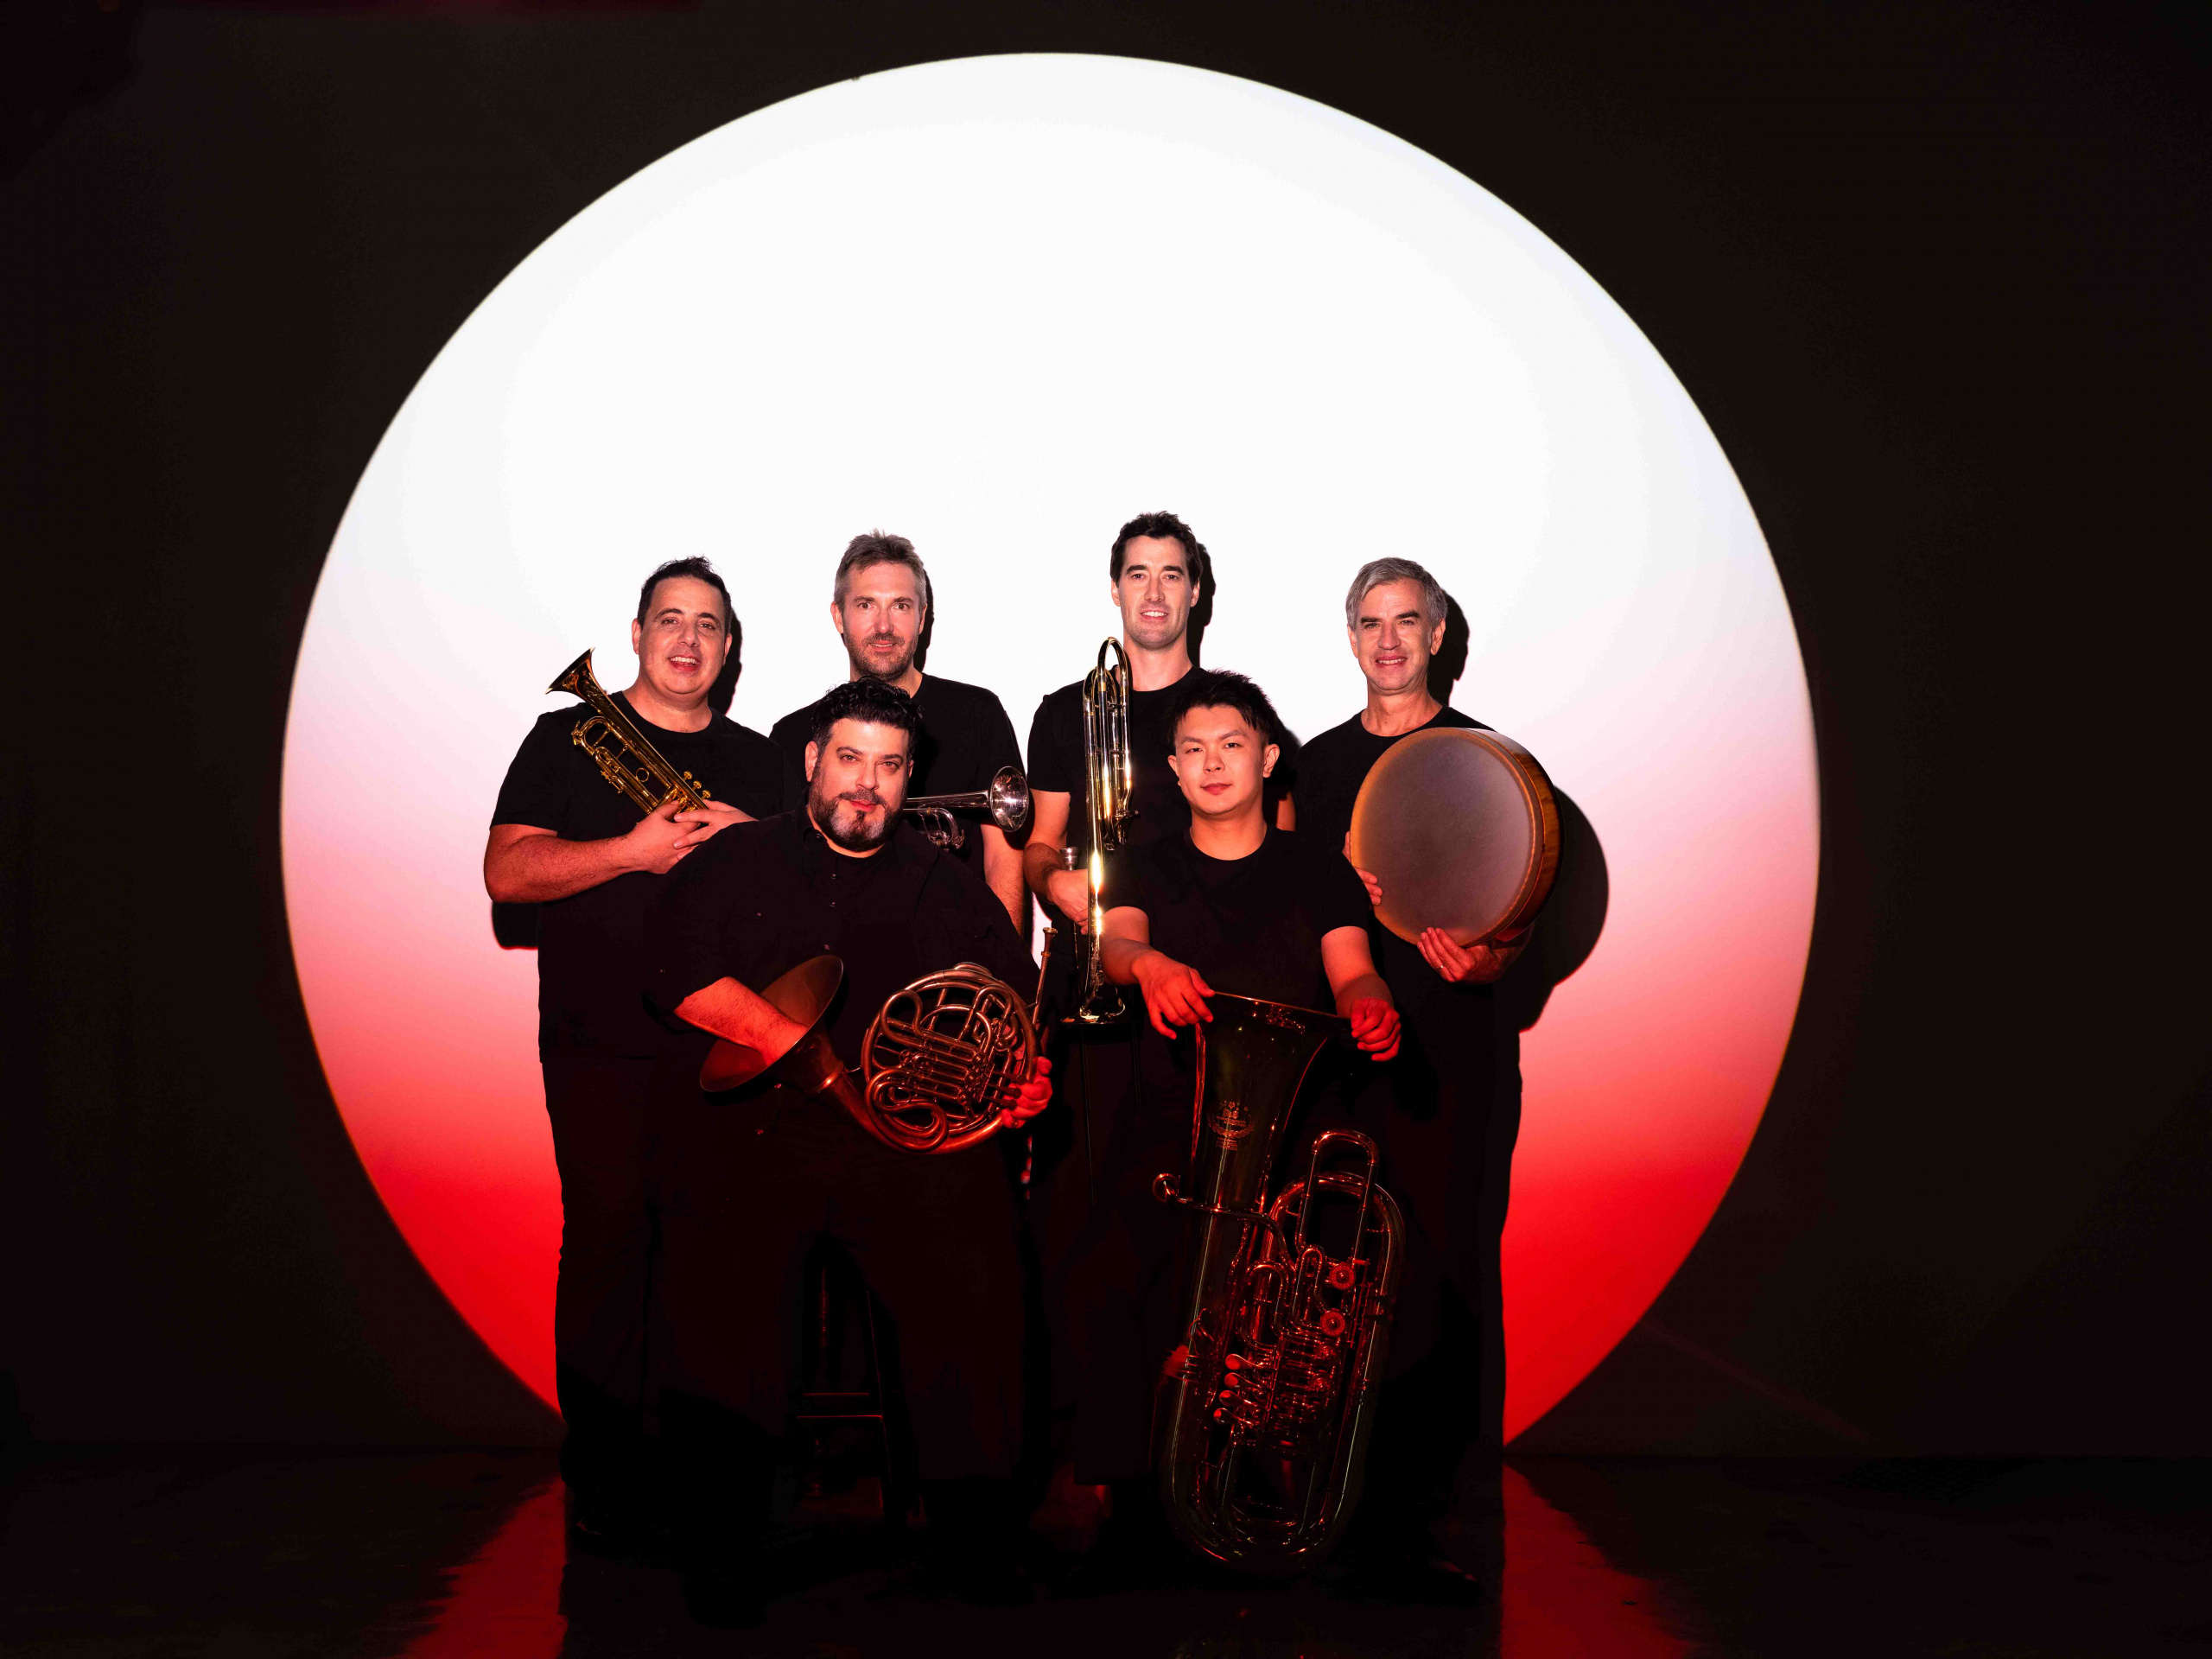 group shot of band members with their instruments against a white circle backdrop, and shot with red lighting